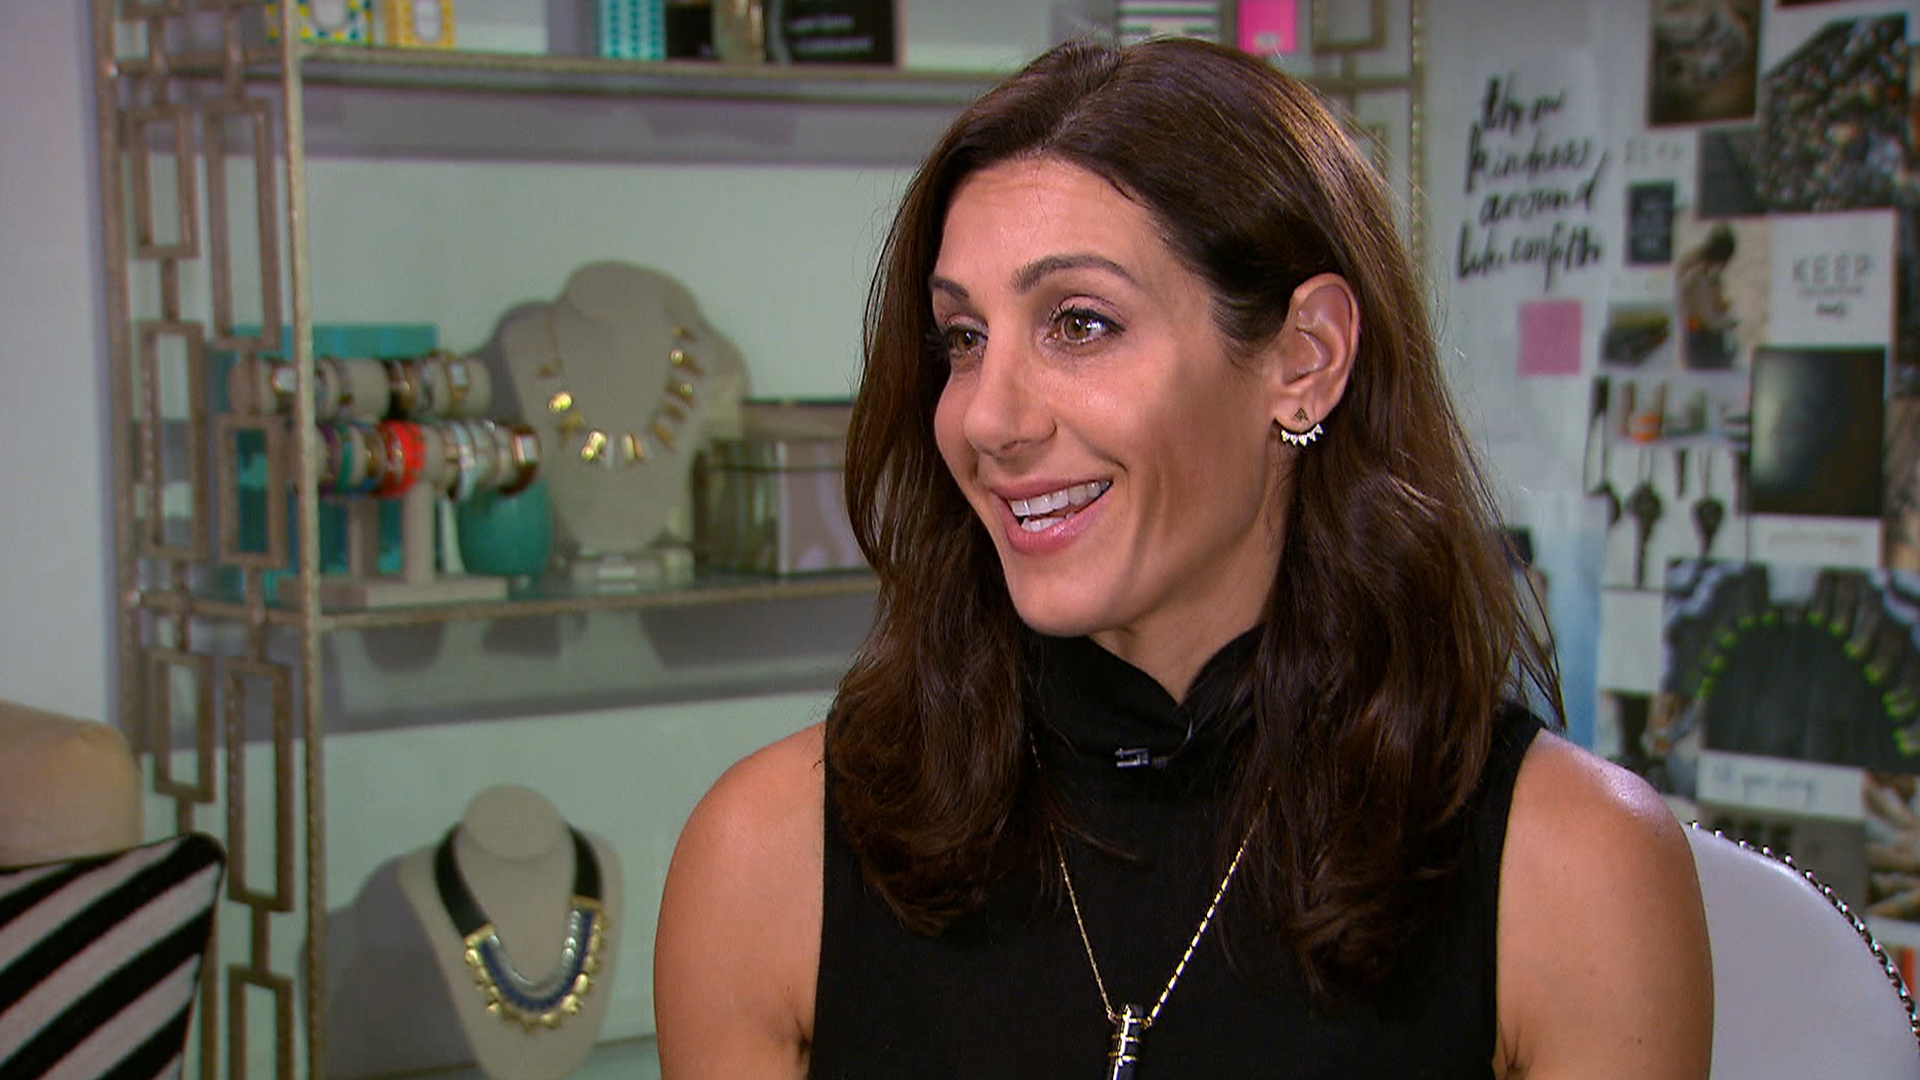 Meet the woman who's shaking up Silicon Valley with Stella & Dot